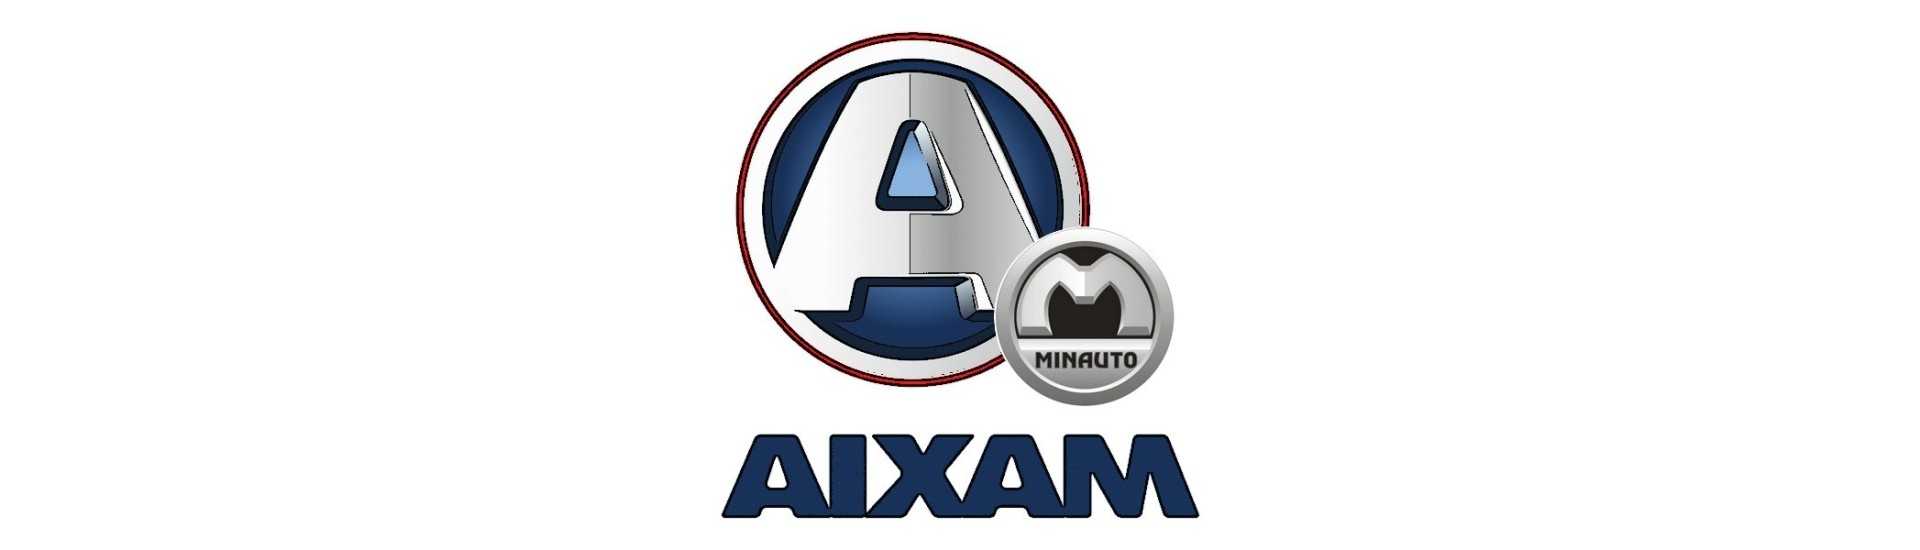 Wheel lock at best price for car without license Aixam Minauto